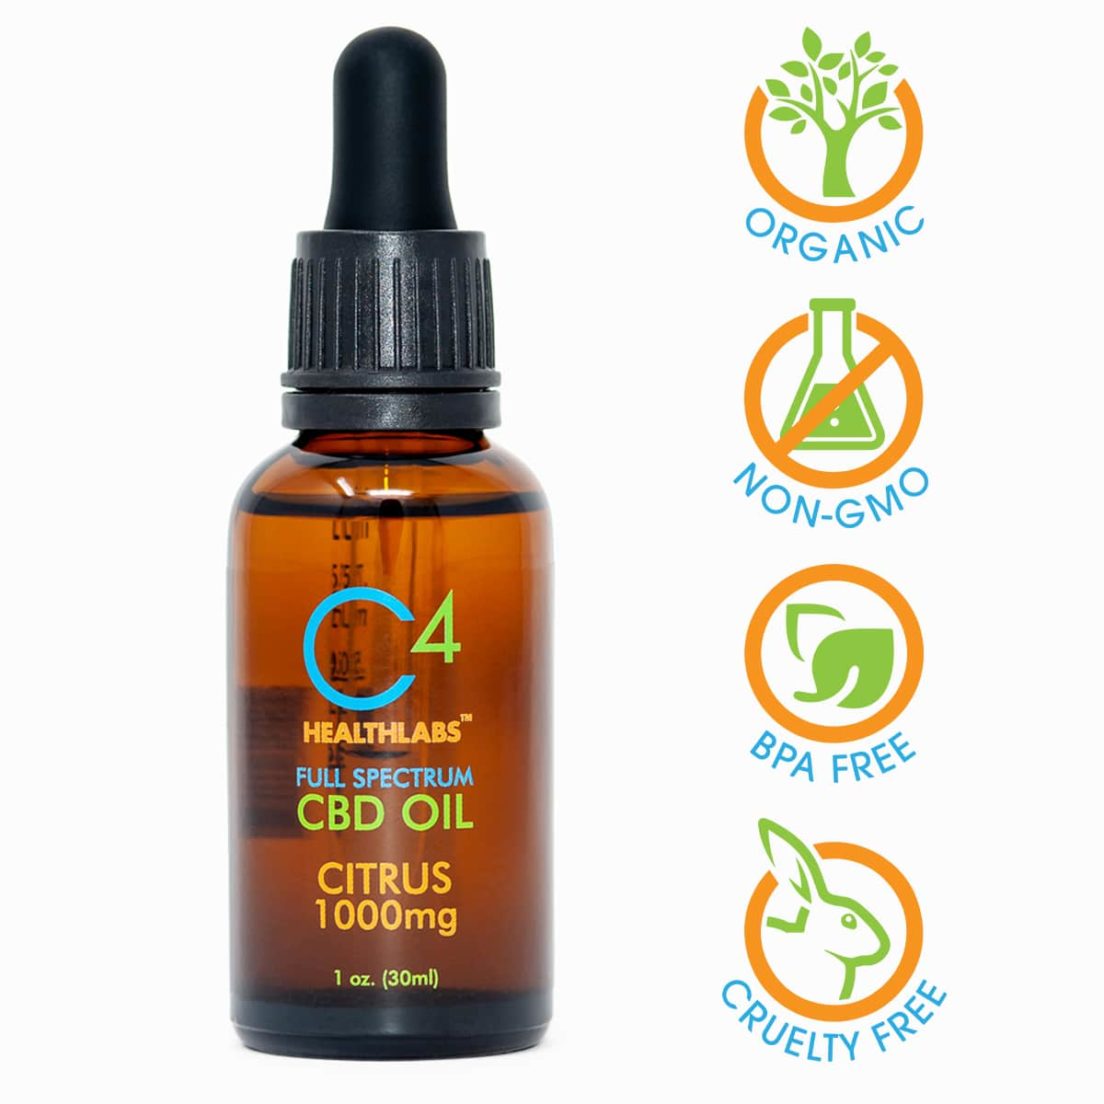 C4 Healthlabs Review: CBD Oils That Achieve Results